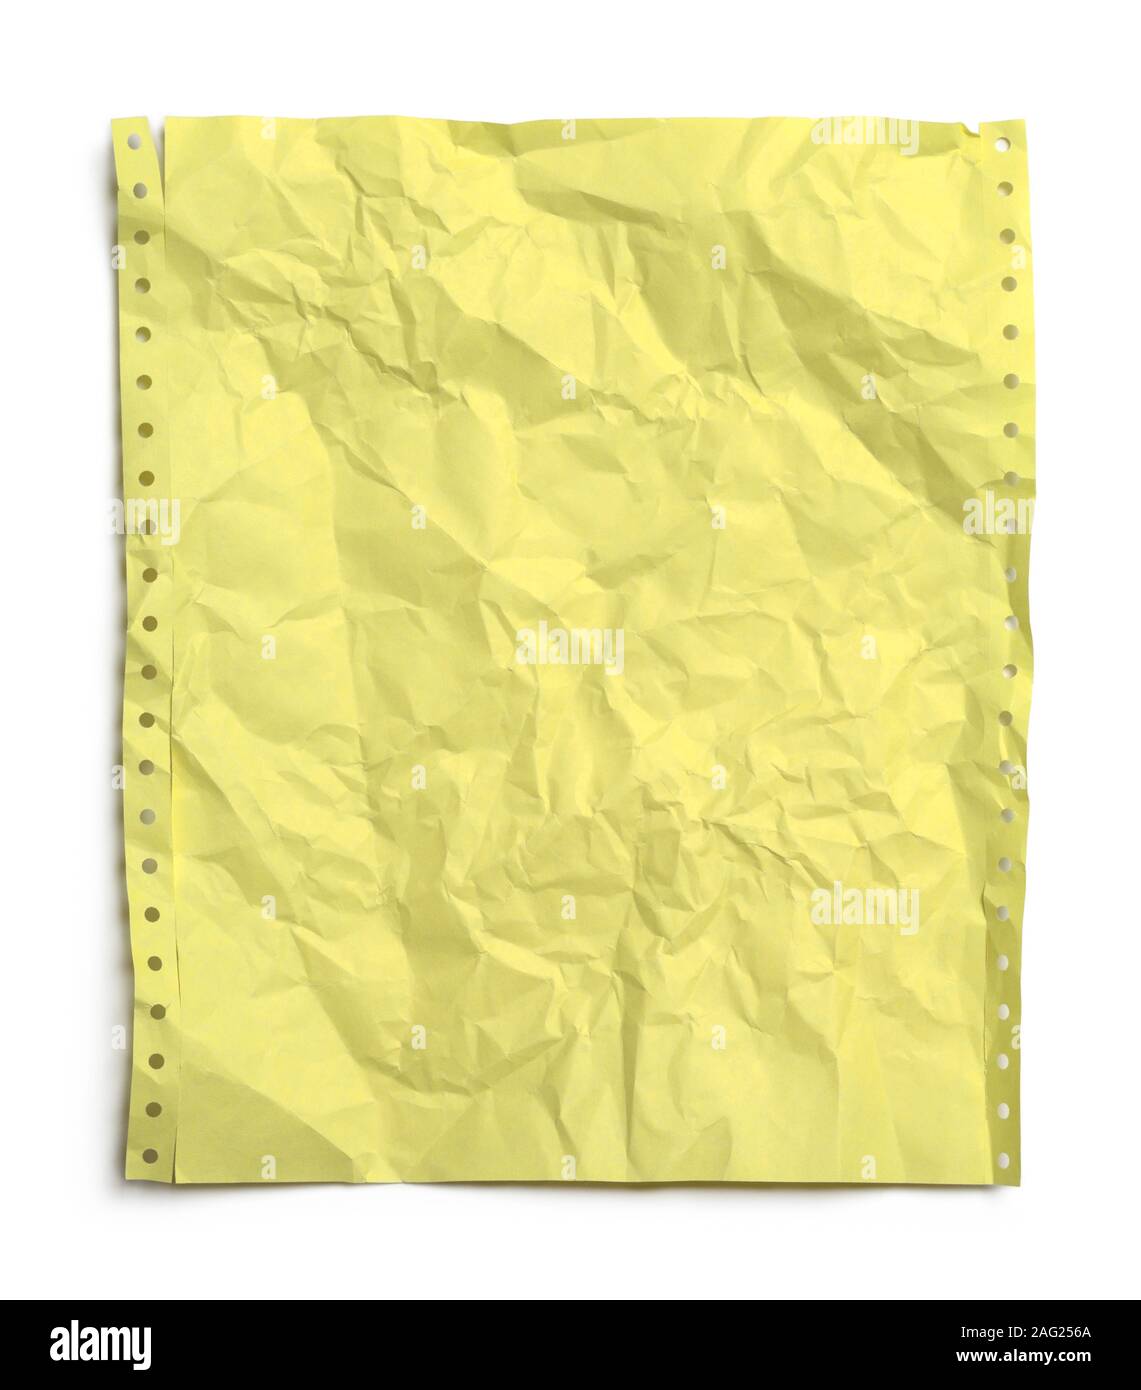 Yellow Wrinkled Computer Paper Isolated on White. Stock Photo